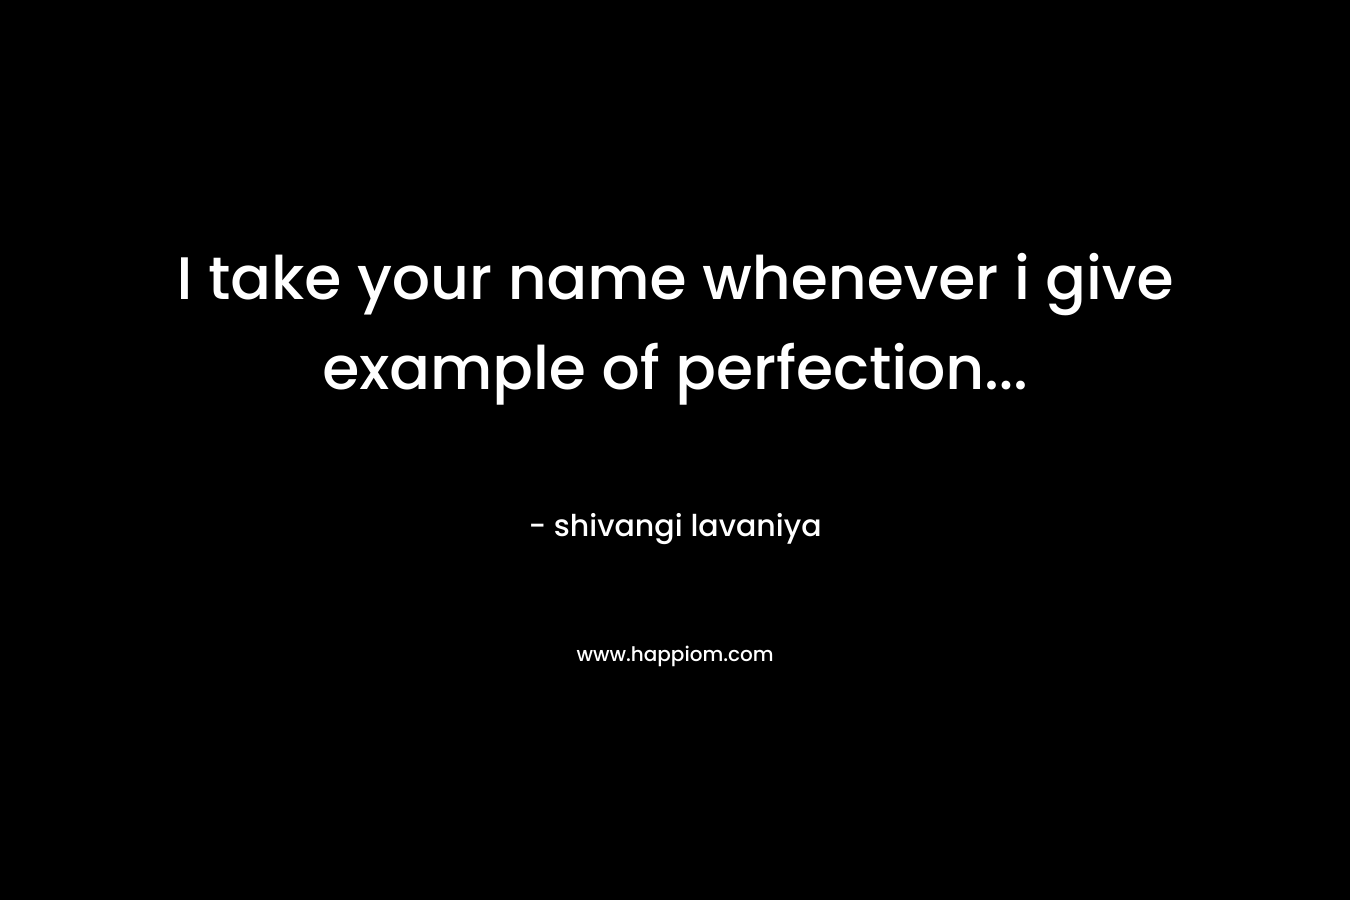 I take your name whenever i give example of perfection...